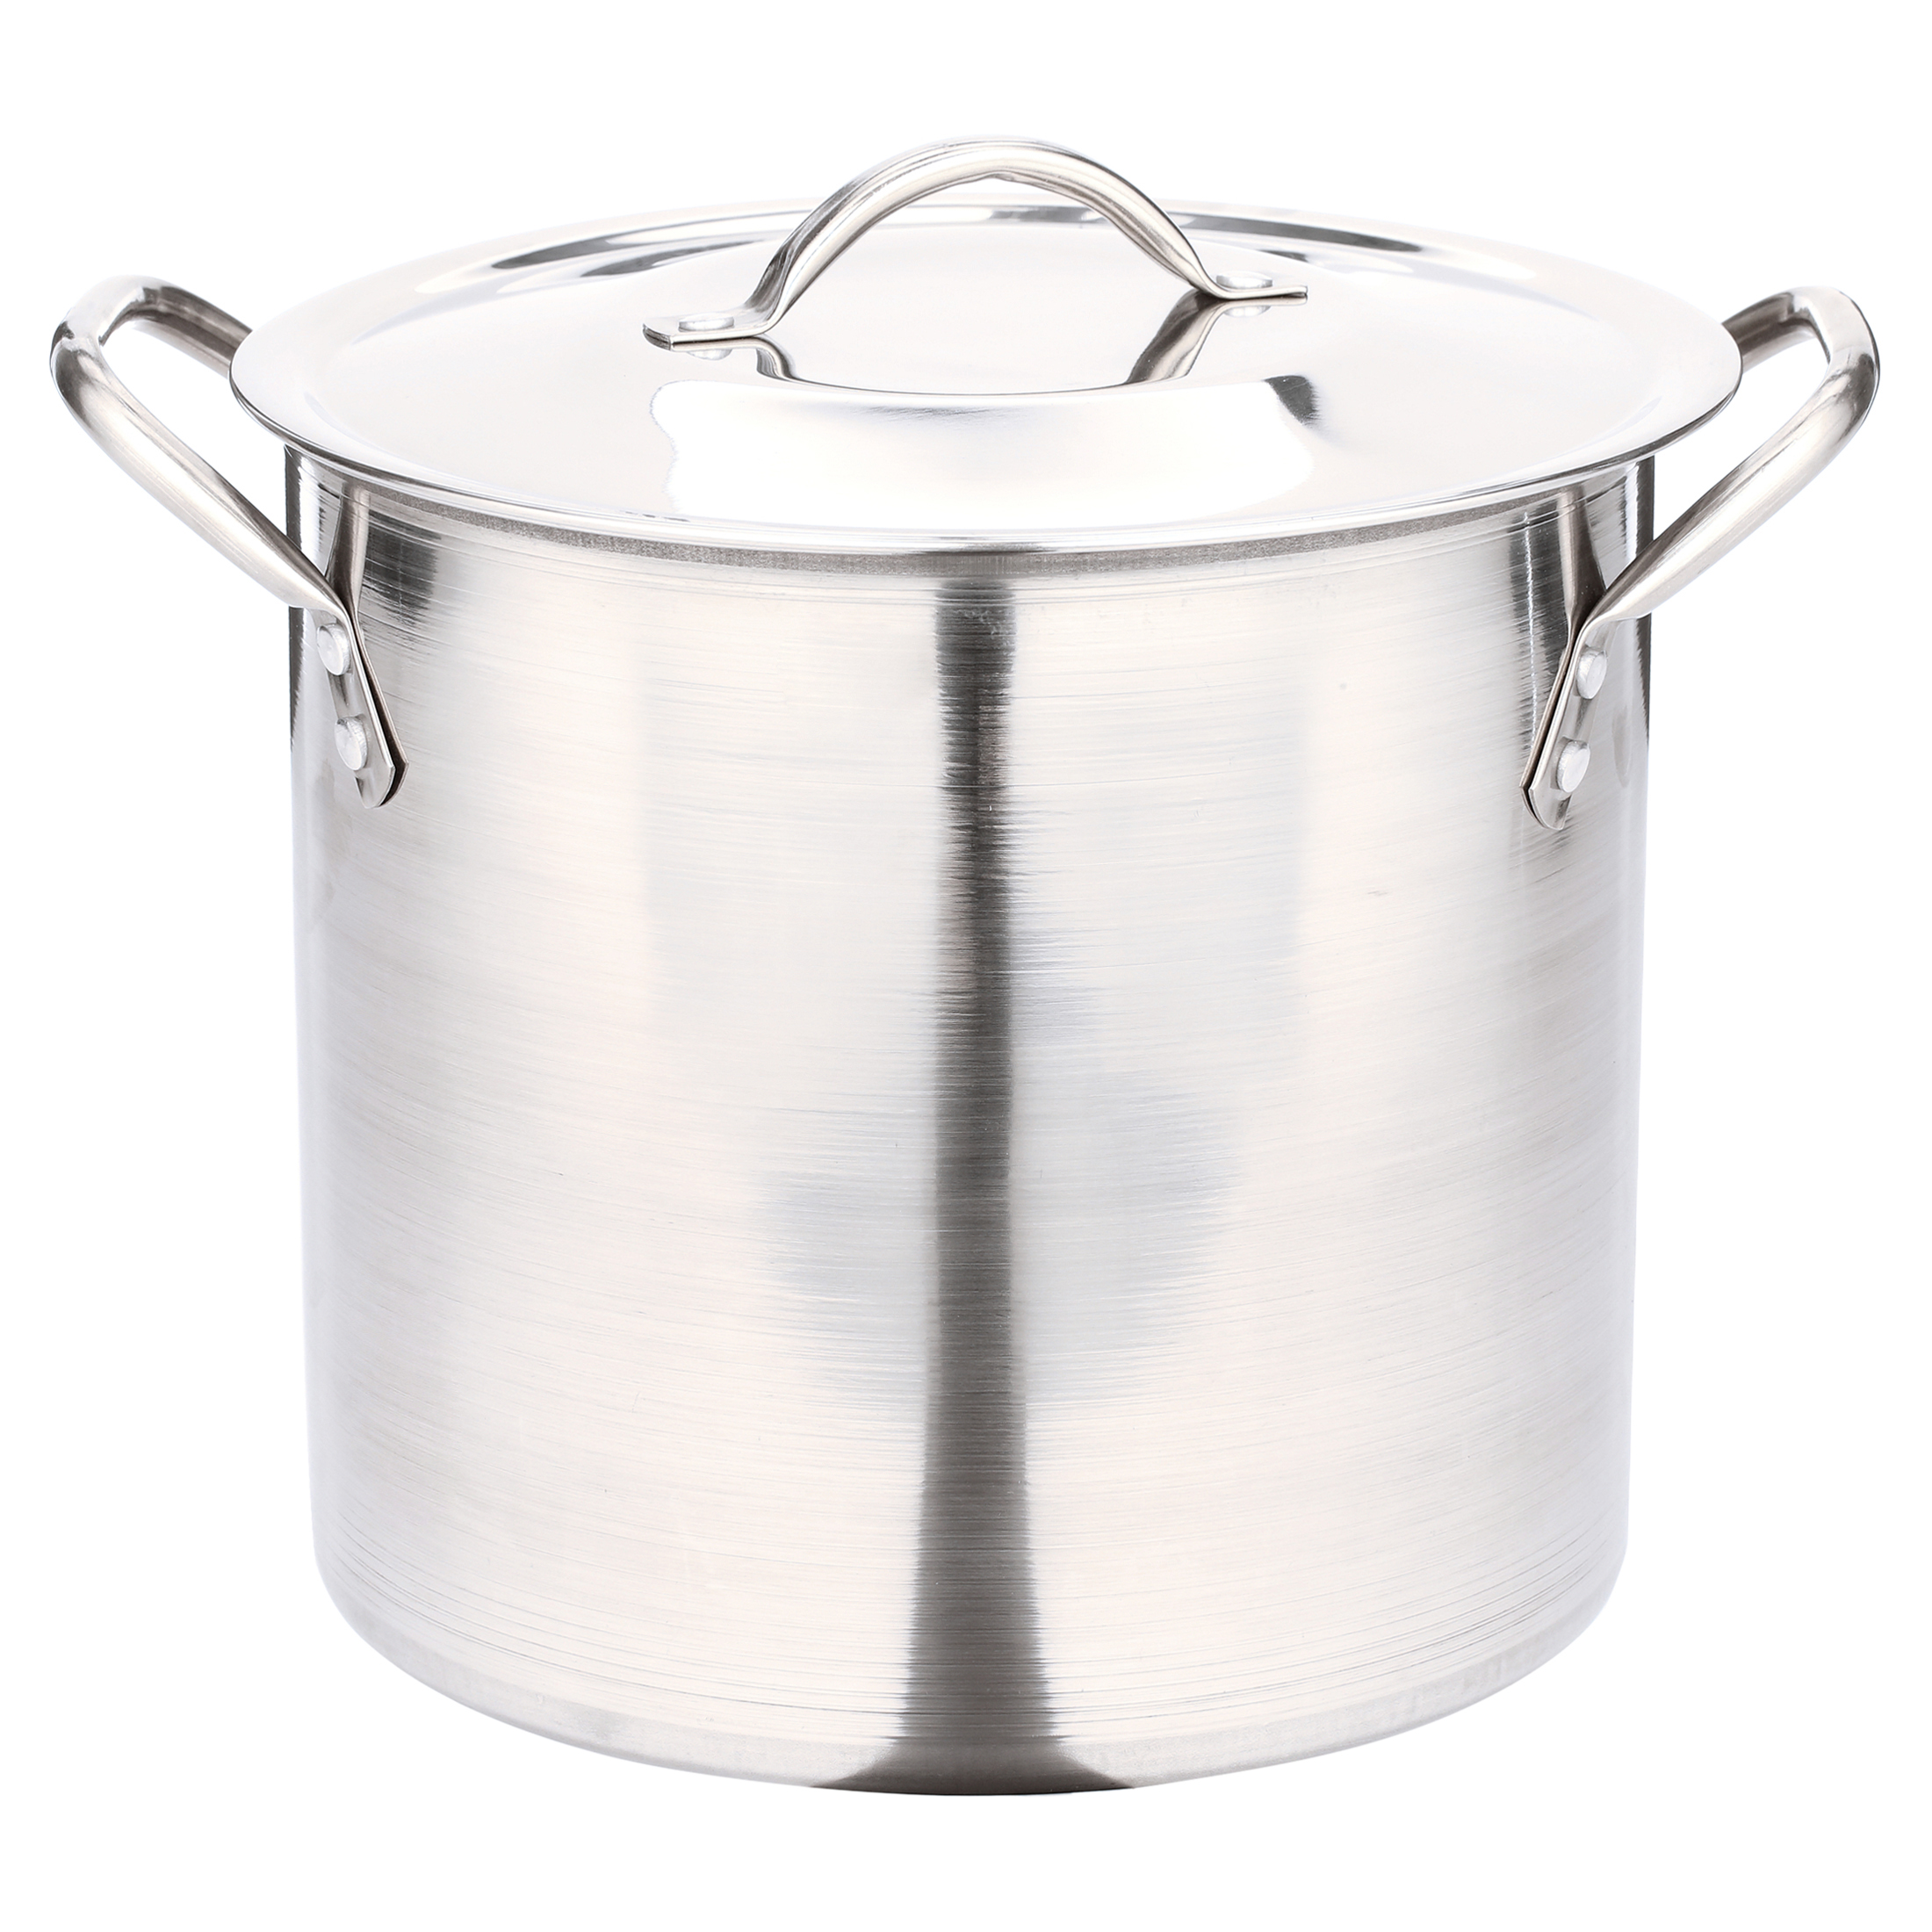 Mainstays 8-Qt Stainless Steel Stock Pot with Metal Lid - image 1 of 6